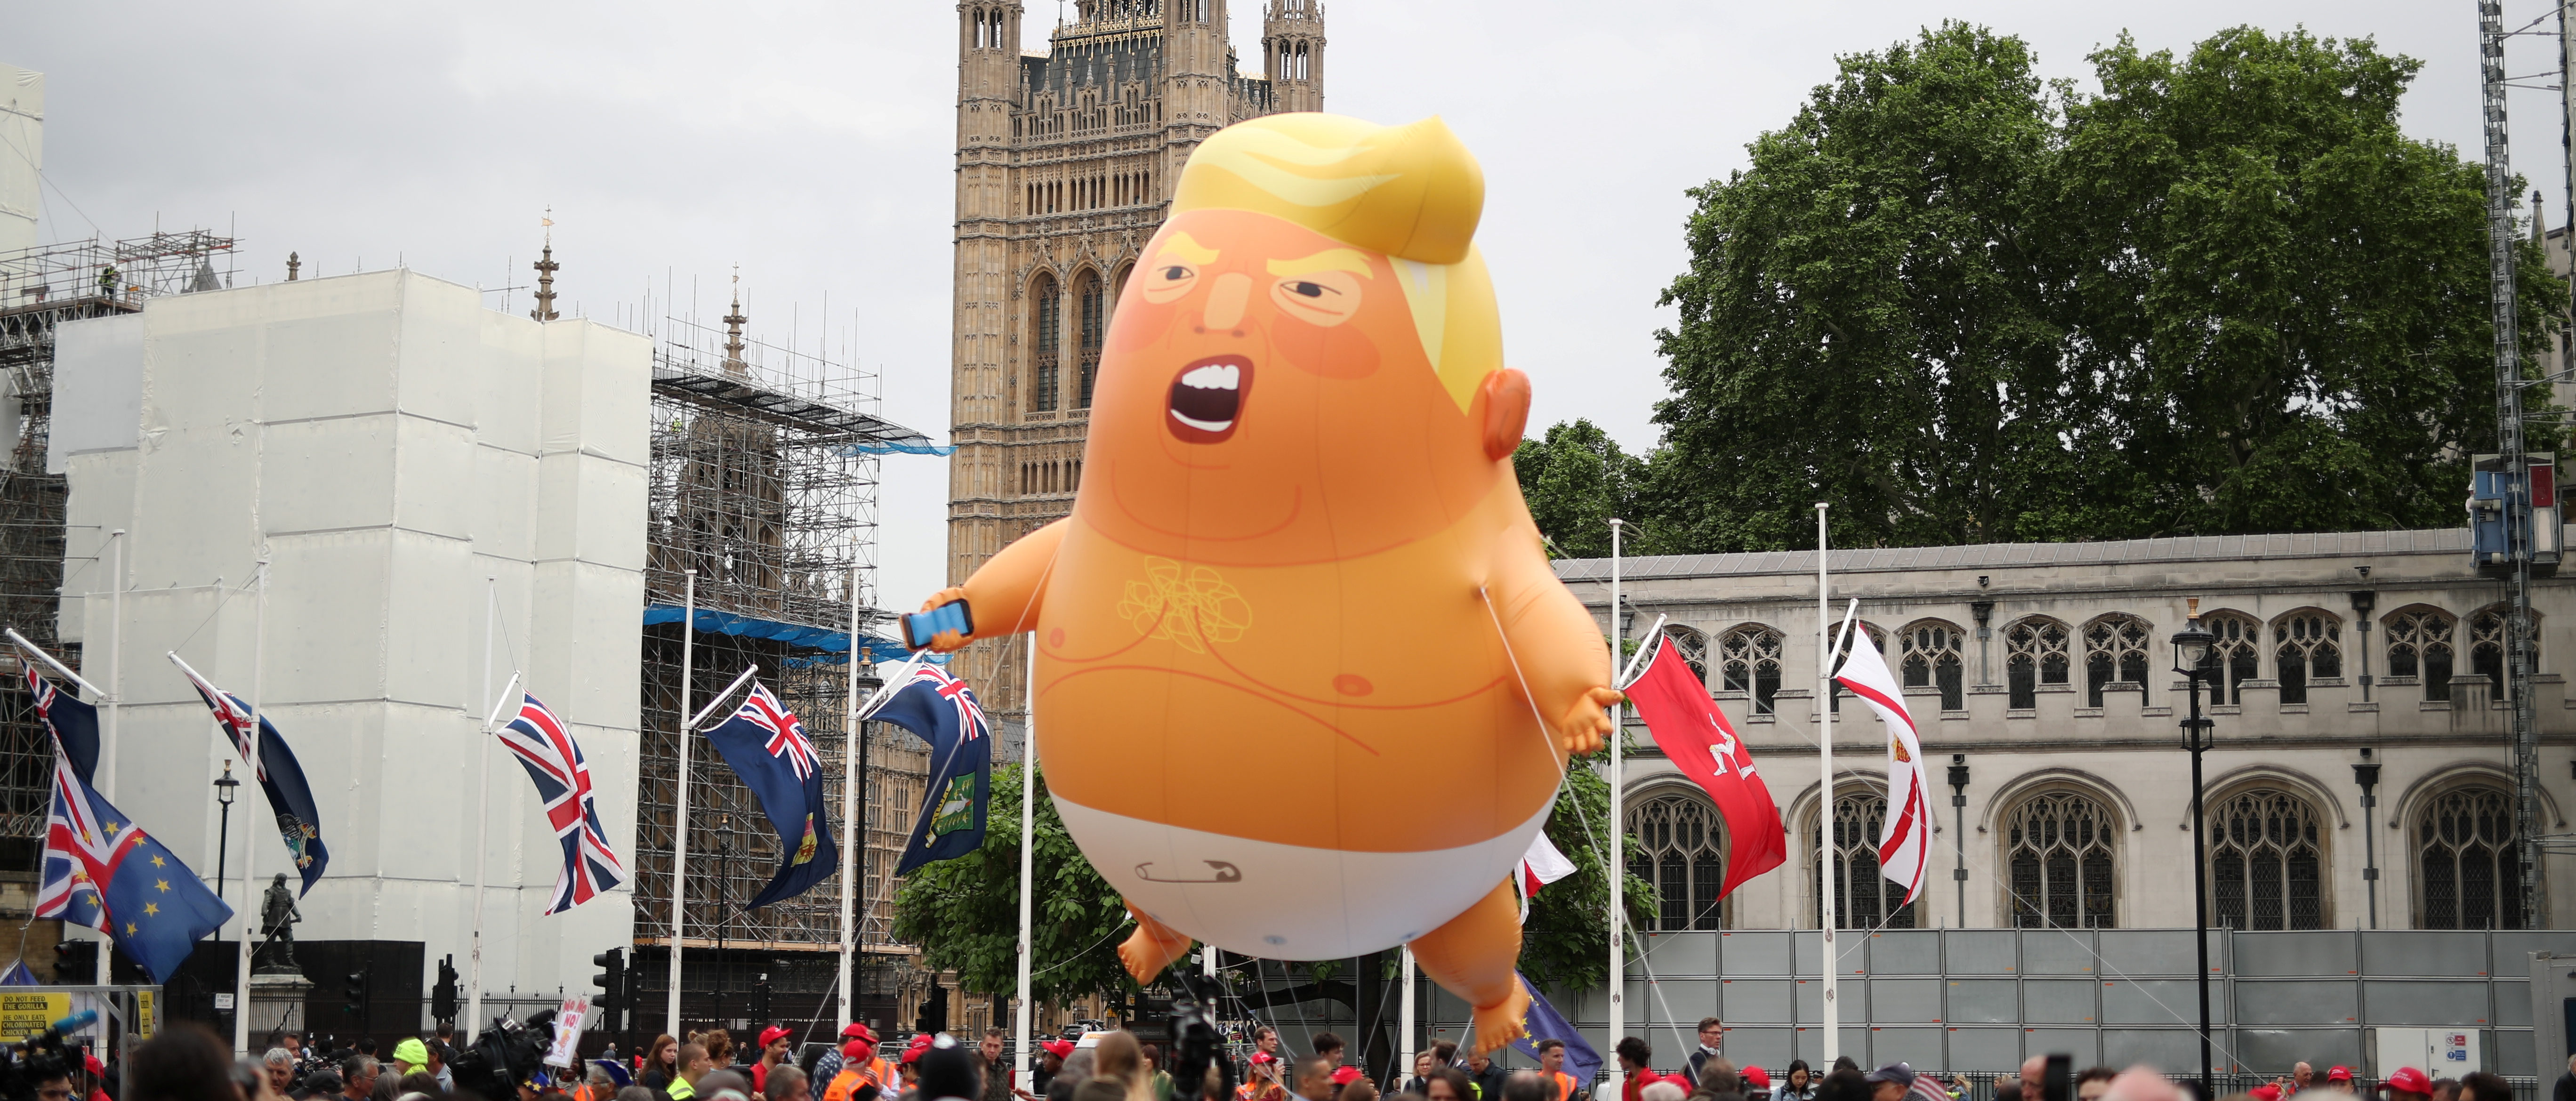 A "Baby Trump" balloon flies over demonstrators as they take part in an anti-Trump protest in London, Britain, June 4, 2019. REUTERS/Alkis Konstantinidis